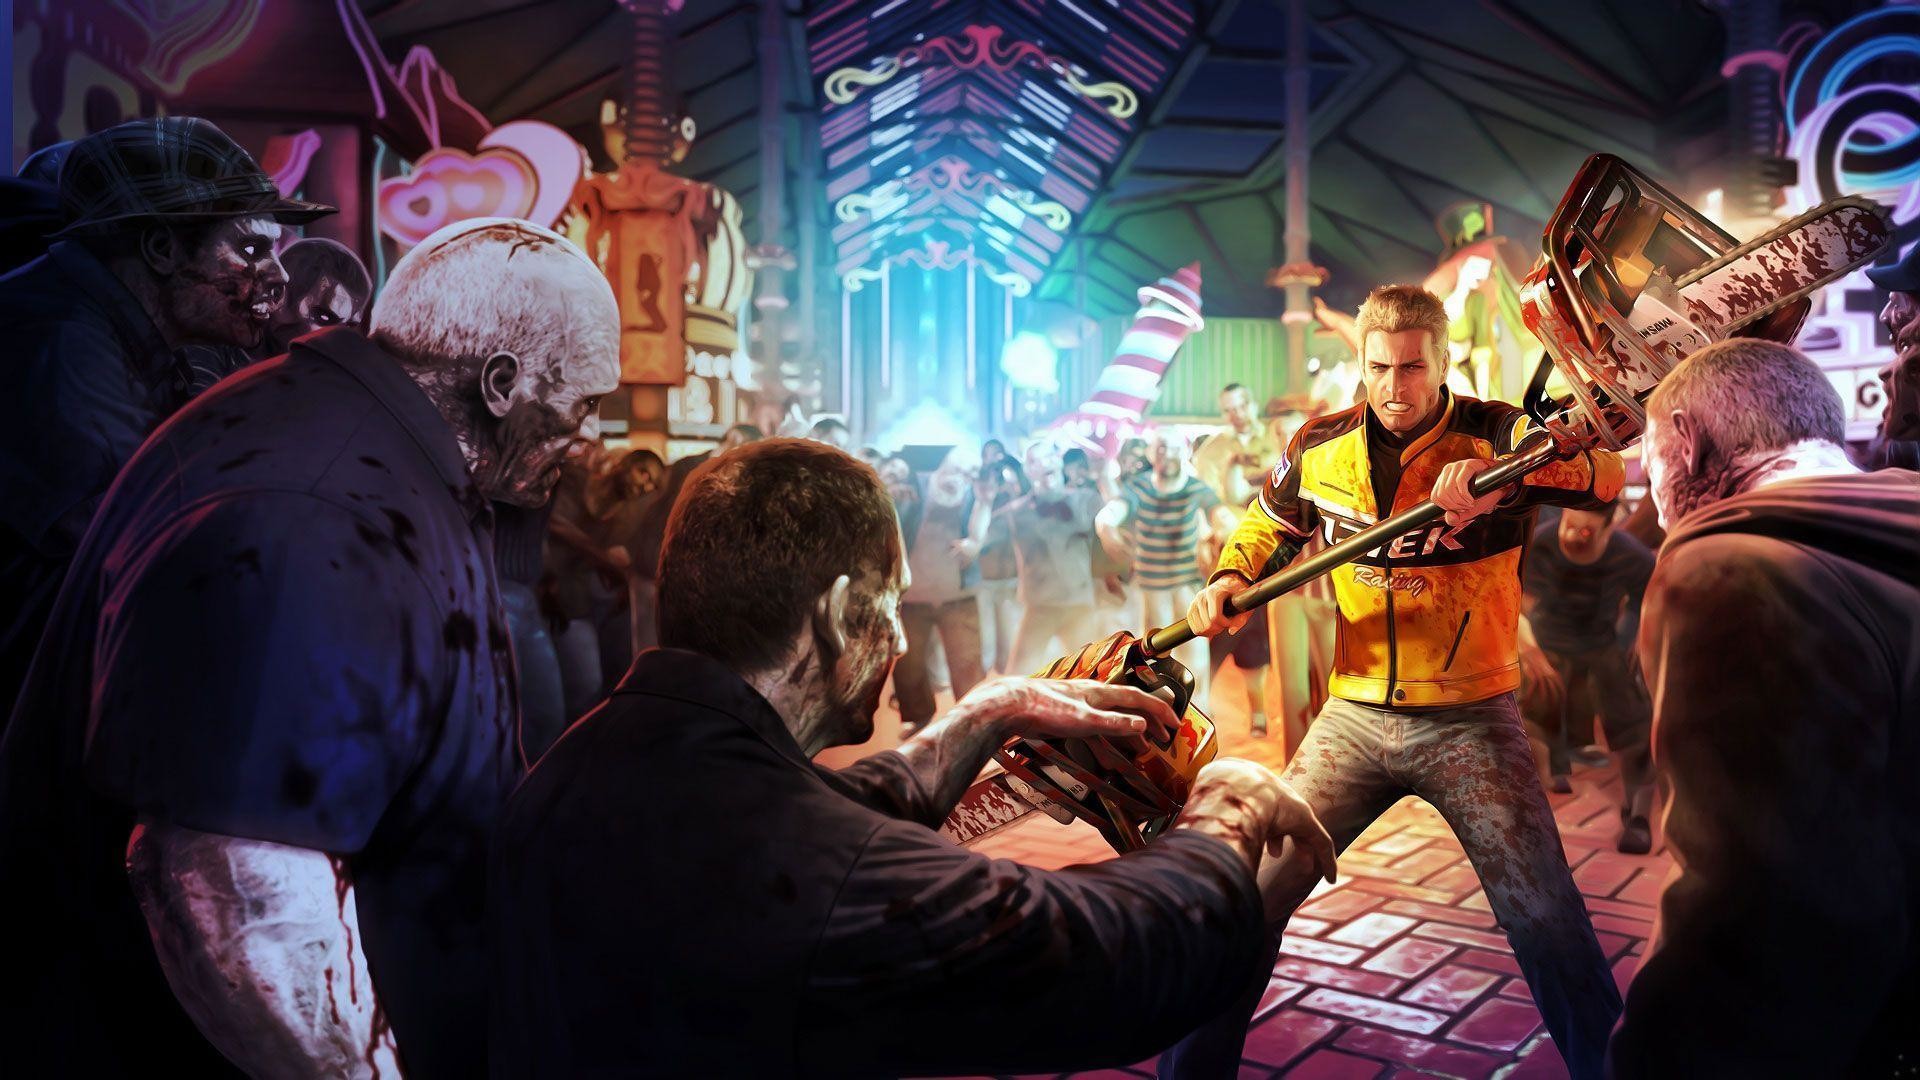 1920x1080 Games Wallpapers - Dead Rising 2 - Zombies Fight wallpaper